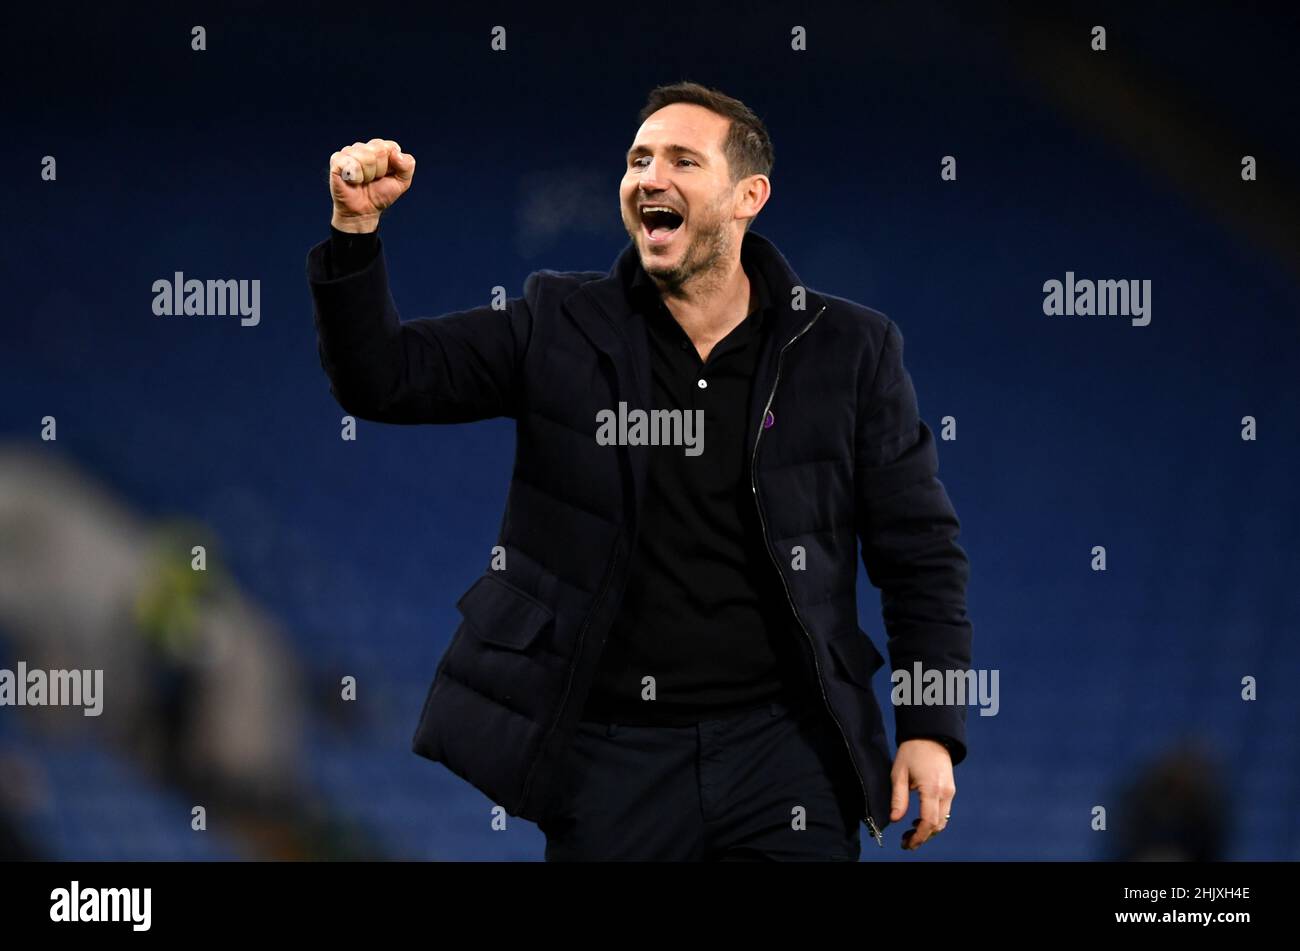 File photo dated 05-12-2020 of Frank Lampard. Everton had the strangest of transfer windows, with five players signed by two different managers. Rafael Benitez added full-backs Nathan Patterson and Vitalii Mykolenko and striker Anwar El Ghazi, on loan from Aston Villa, before his mid-January departure. Frank Lampard then snapped up Tottenham's Dele Alli and Donny Van De Beek from Manchester United, the latter on loan, within hours of his deadline day arrival at Goodison Park. While Lampard has much to prove after his time as Chelsea boss, as do Alli and Van De Beek after their recent struggles Stock Photo